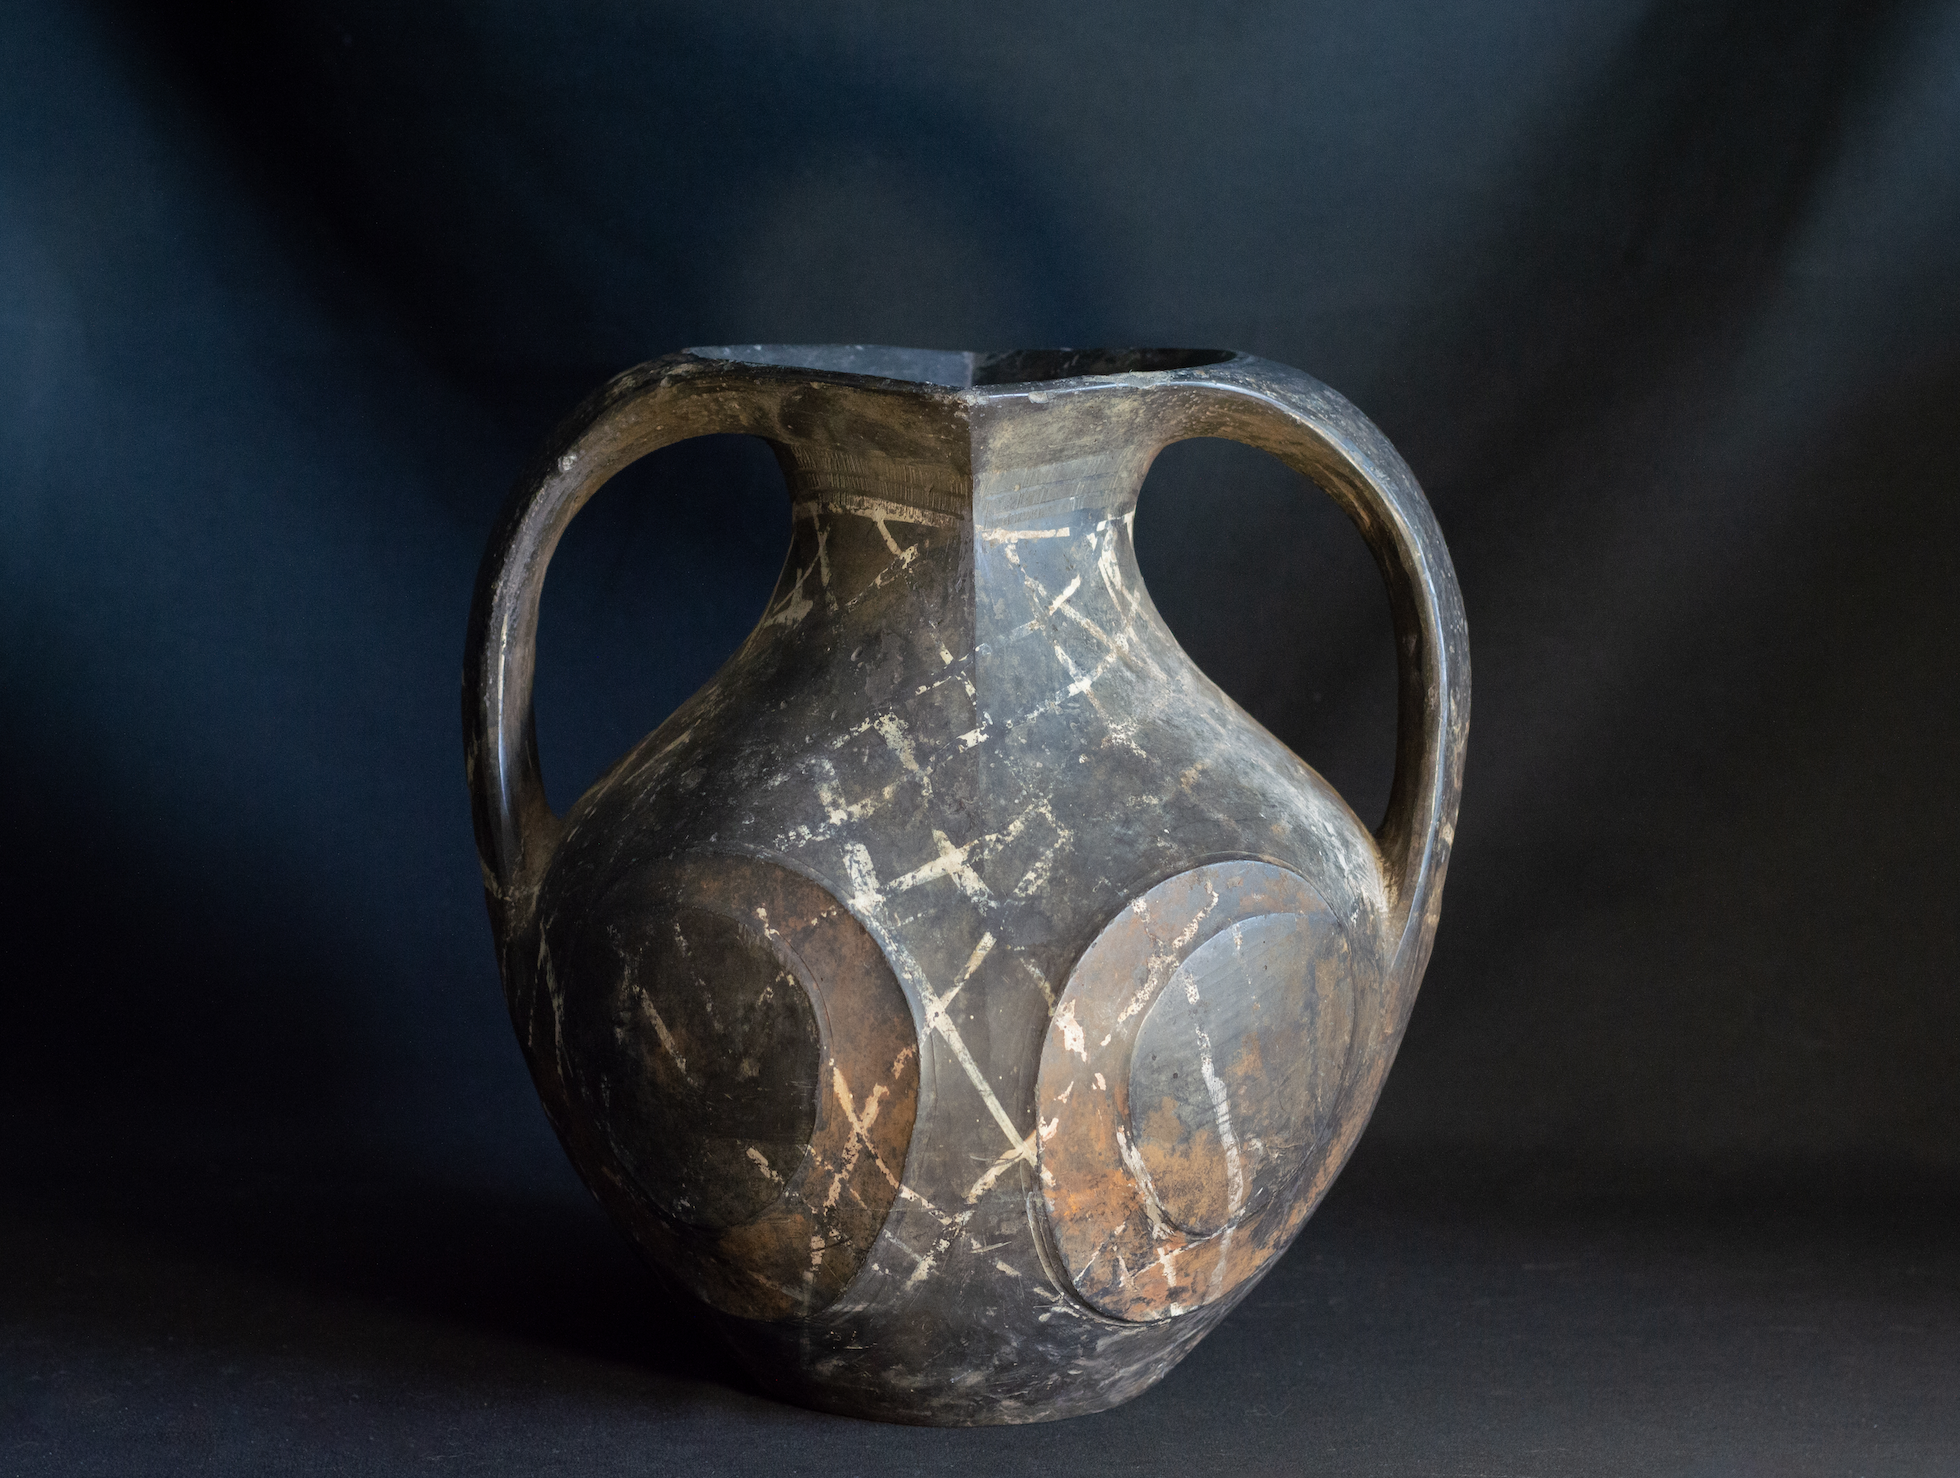 LARGE BLACK DOUBLE-HANDLE AMPHORA 戰漢黑陶“羊角”罐 Warring state to Han dynasty 3rd to 2rd century BCE 31cm high